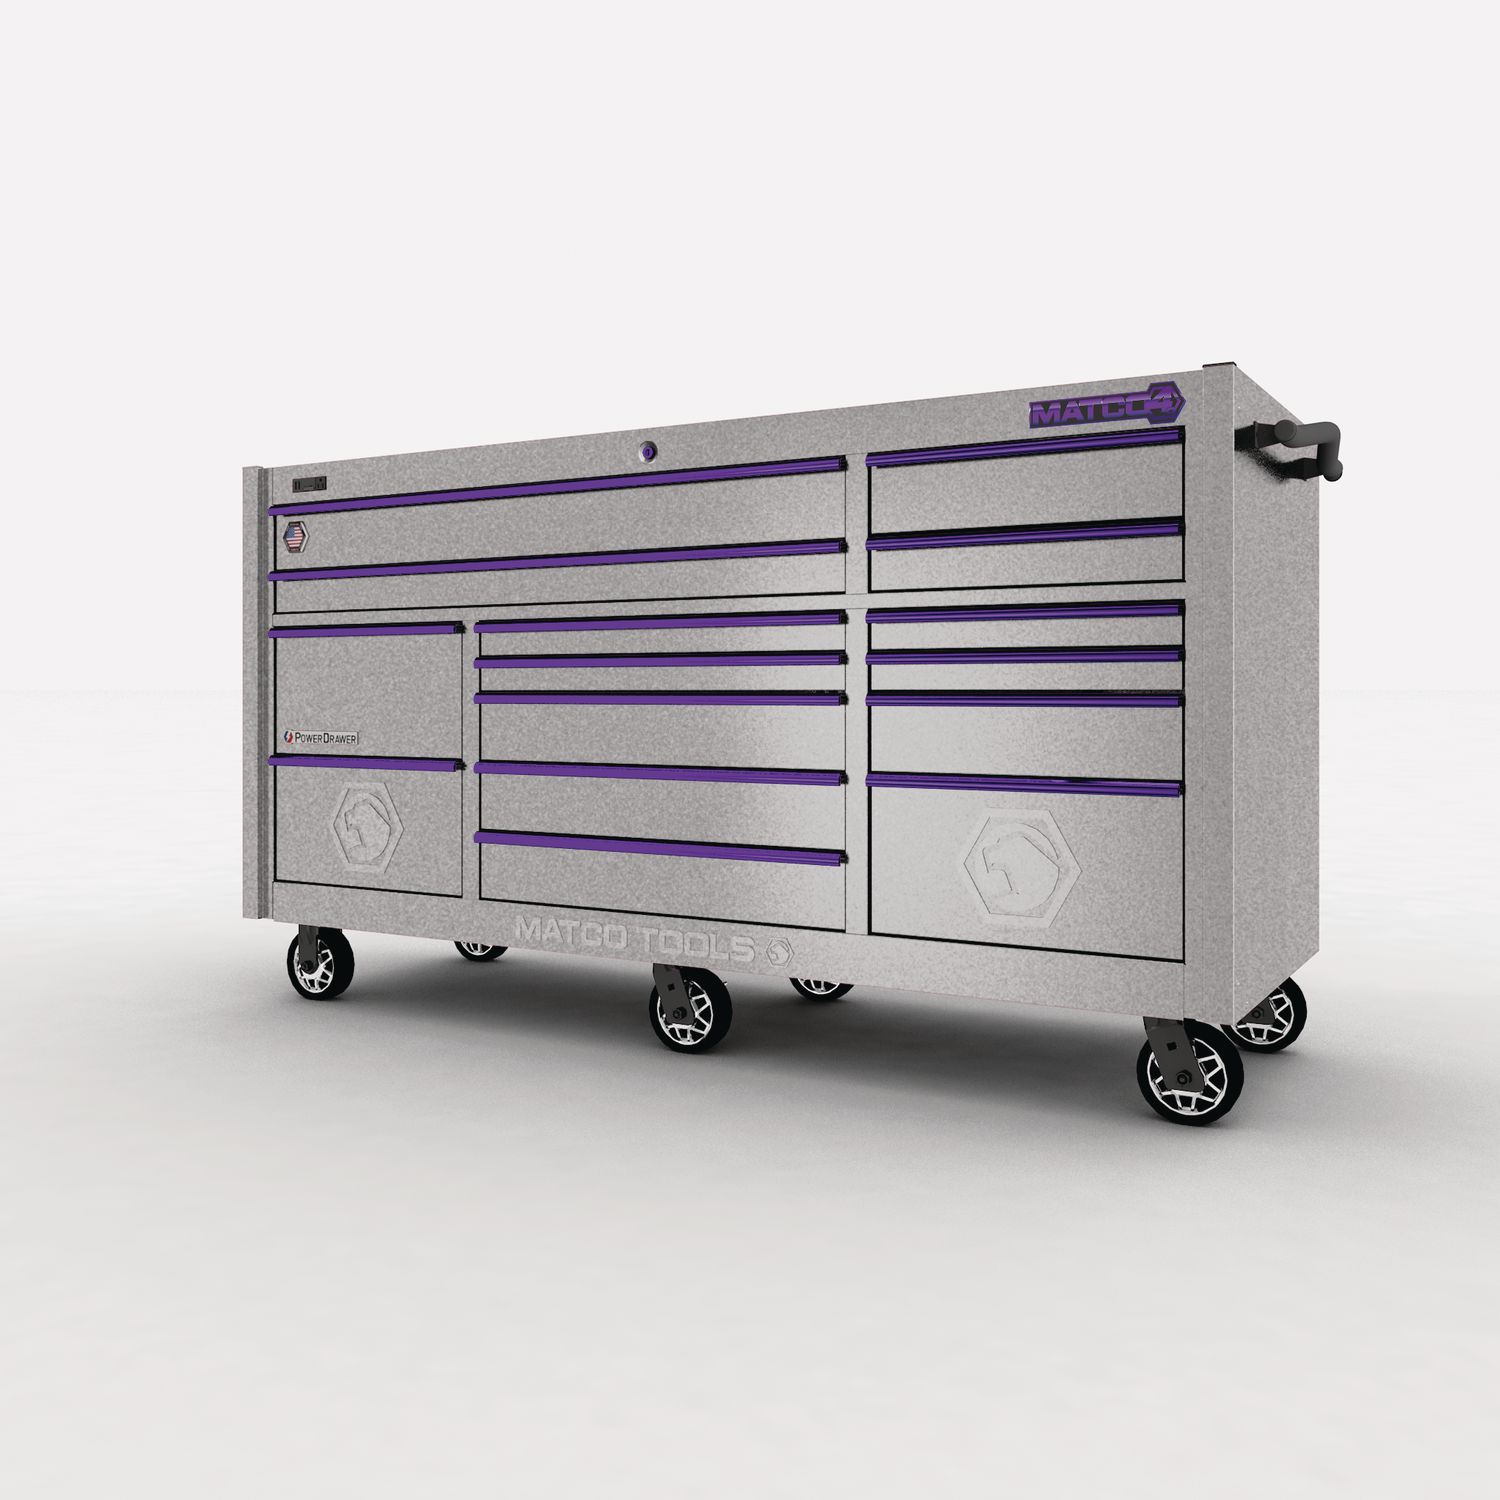 79 x 28 TRIPLE-BAY 4s SERIES TOOLBOX (SUPERCHARGED SILVER/PURPLE)  4328TB-UUP